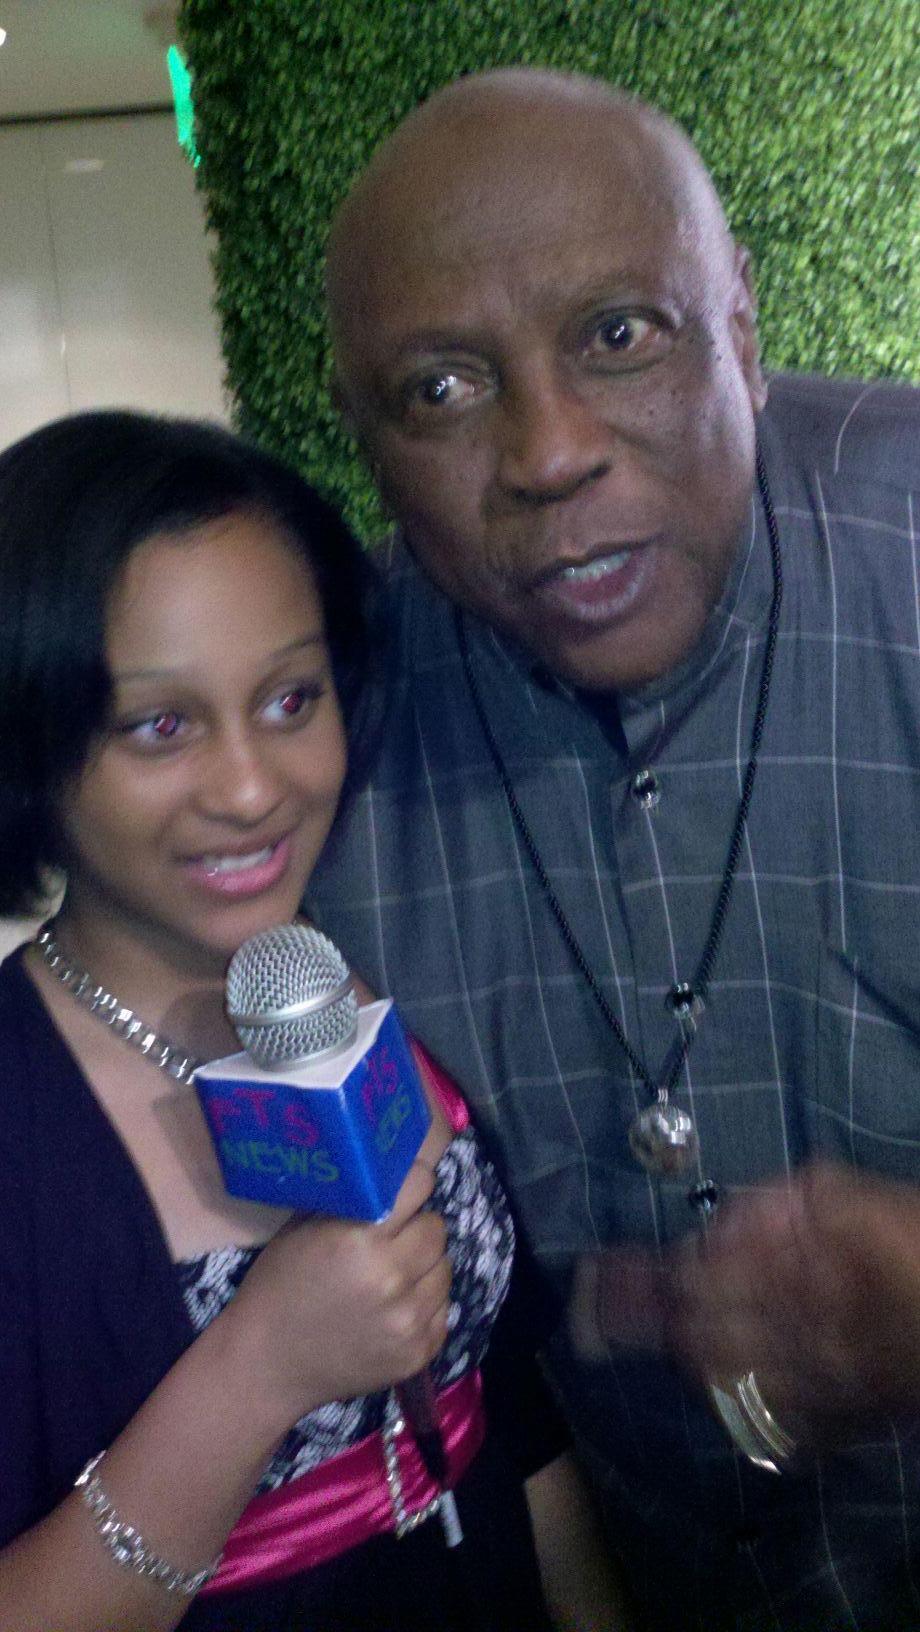 Aliyah at event with Lou Gosstee Jr.